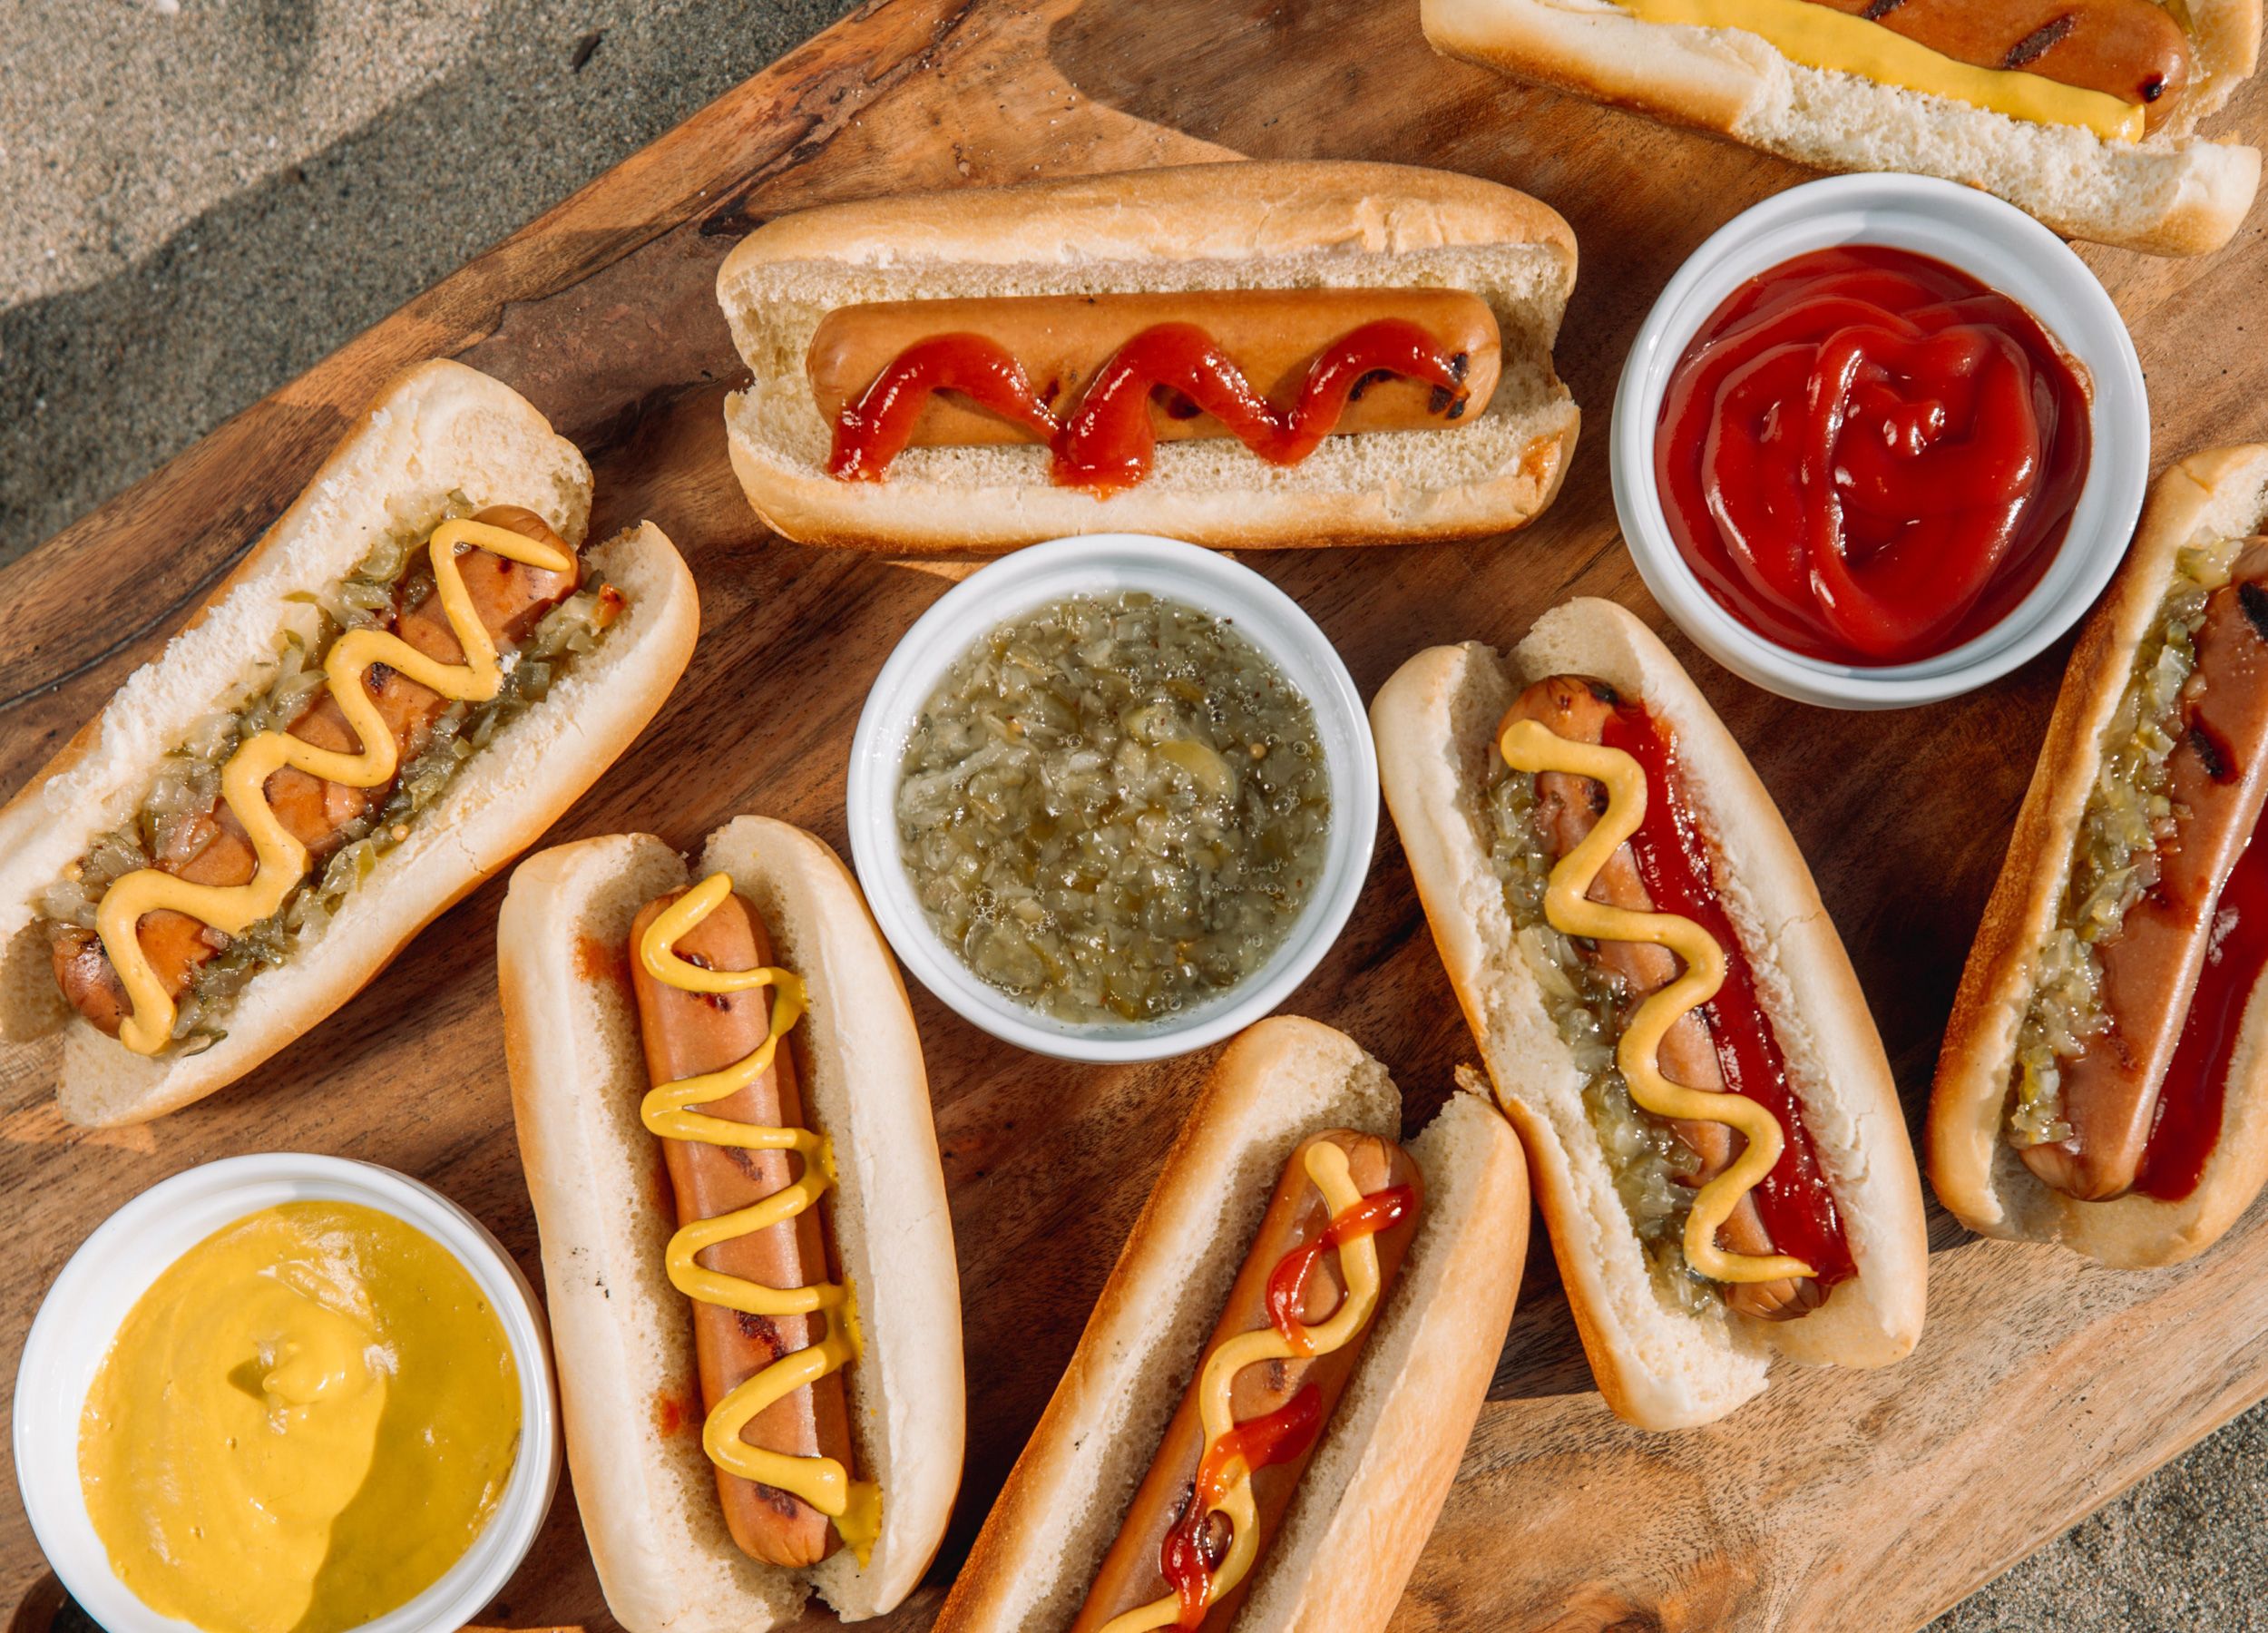 Hot Dog Day: 5 houses specializing in hot dogs in SP